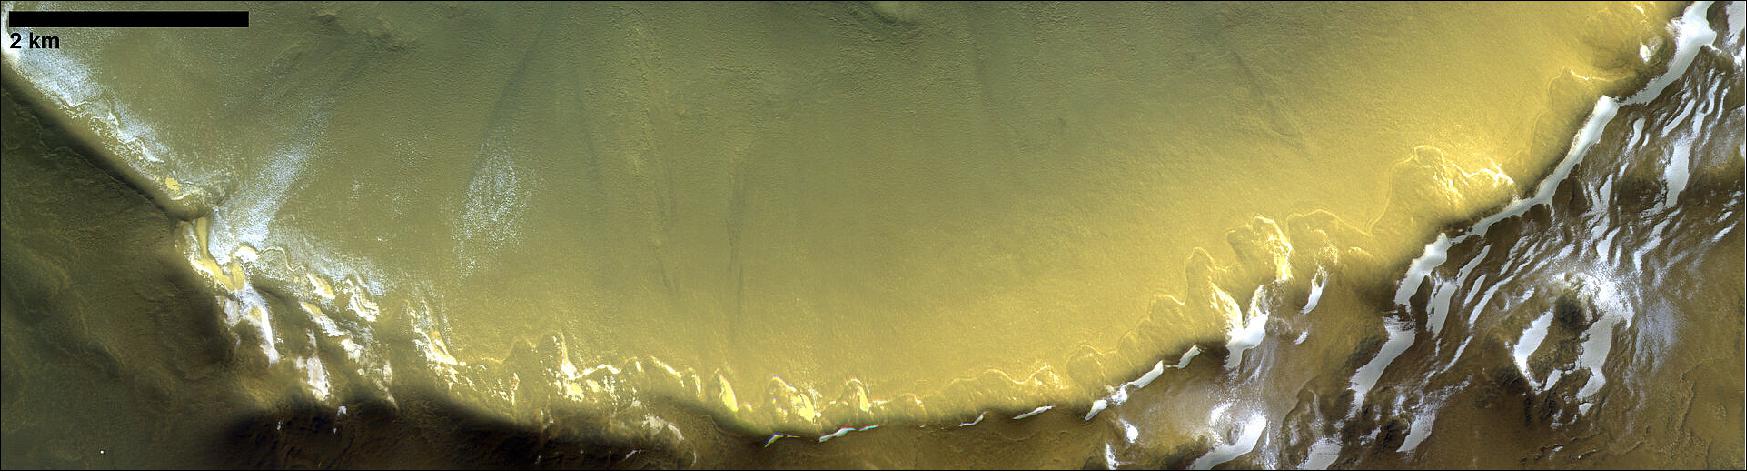 Figure 56: In this image, taken by the CaSSIS camera onboard ESA’s ExoMars Trace Gas Orbiter, the south-eastern wall of a 35 km-wide crater is seen. The image captures its permanent deposits of water ice, which survive the summer months due to the low average sunlight at high latitudes. The image is centered at 192.99ºE/70.4ºN. It was taken on 29 October 2019 (image credit: ESA/Roscosmos/CaSSIS, CC BY-SA 3.0 IGO)